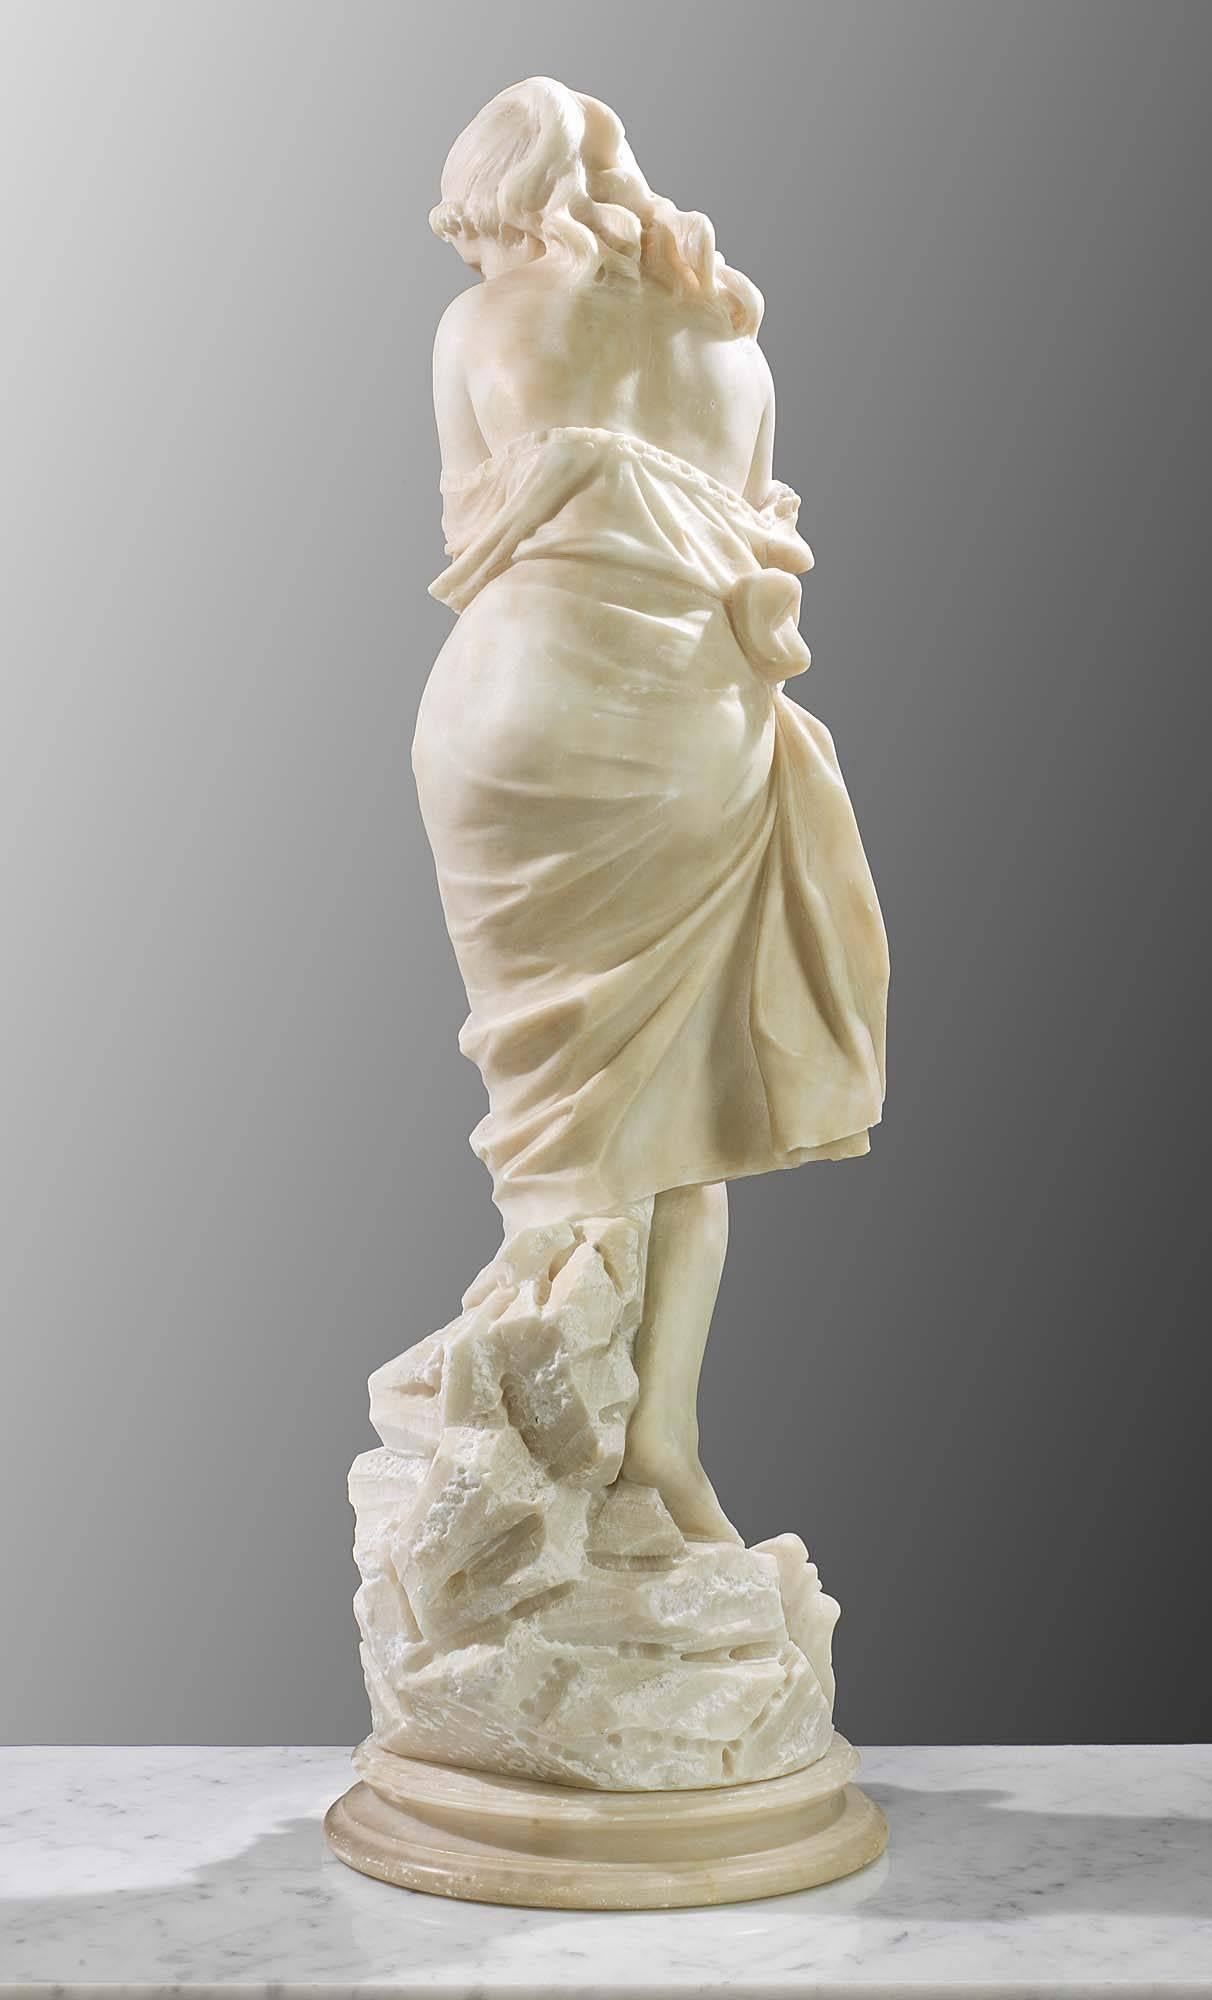 Hand-Carved 19th Century Alabaster Figure of a Young Bather